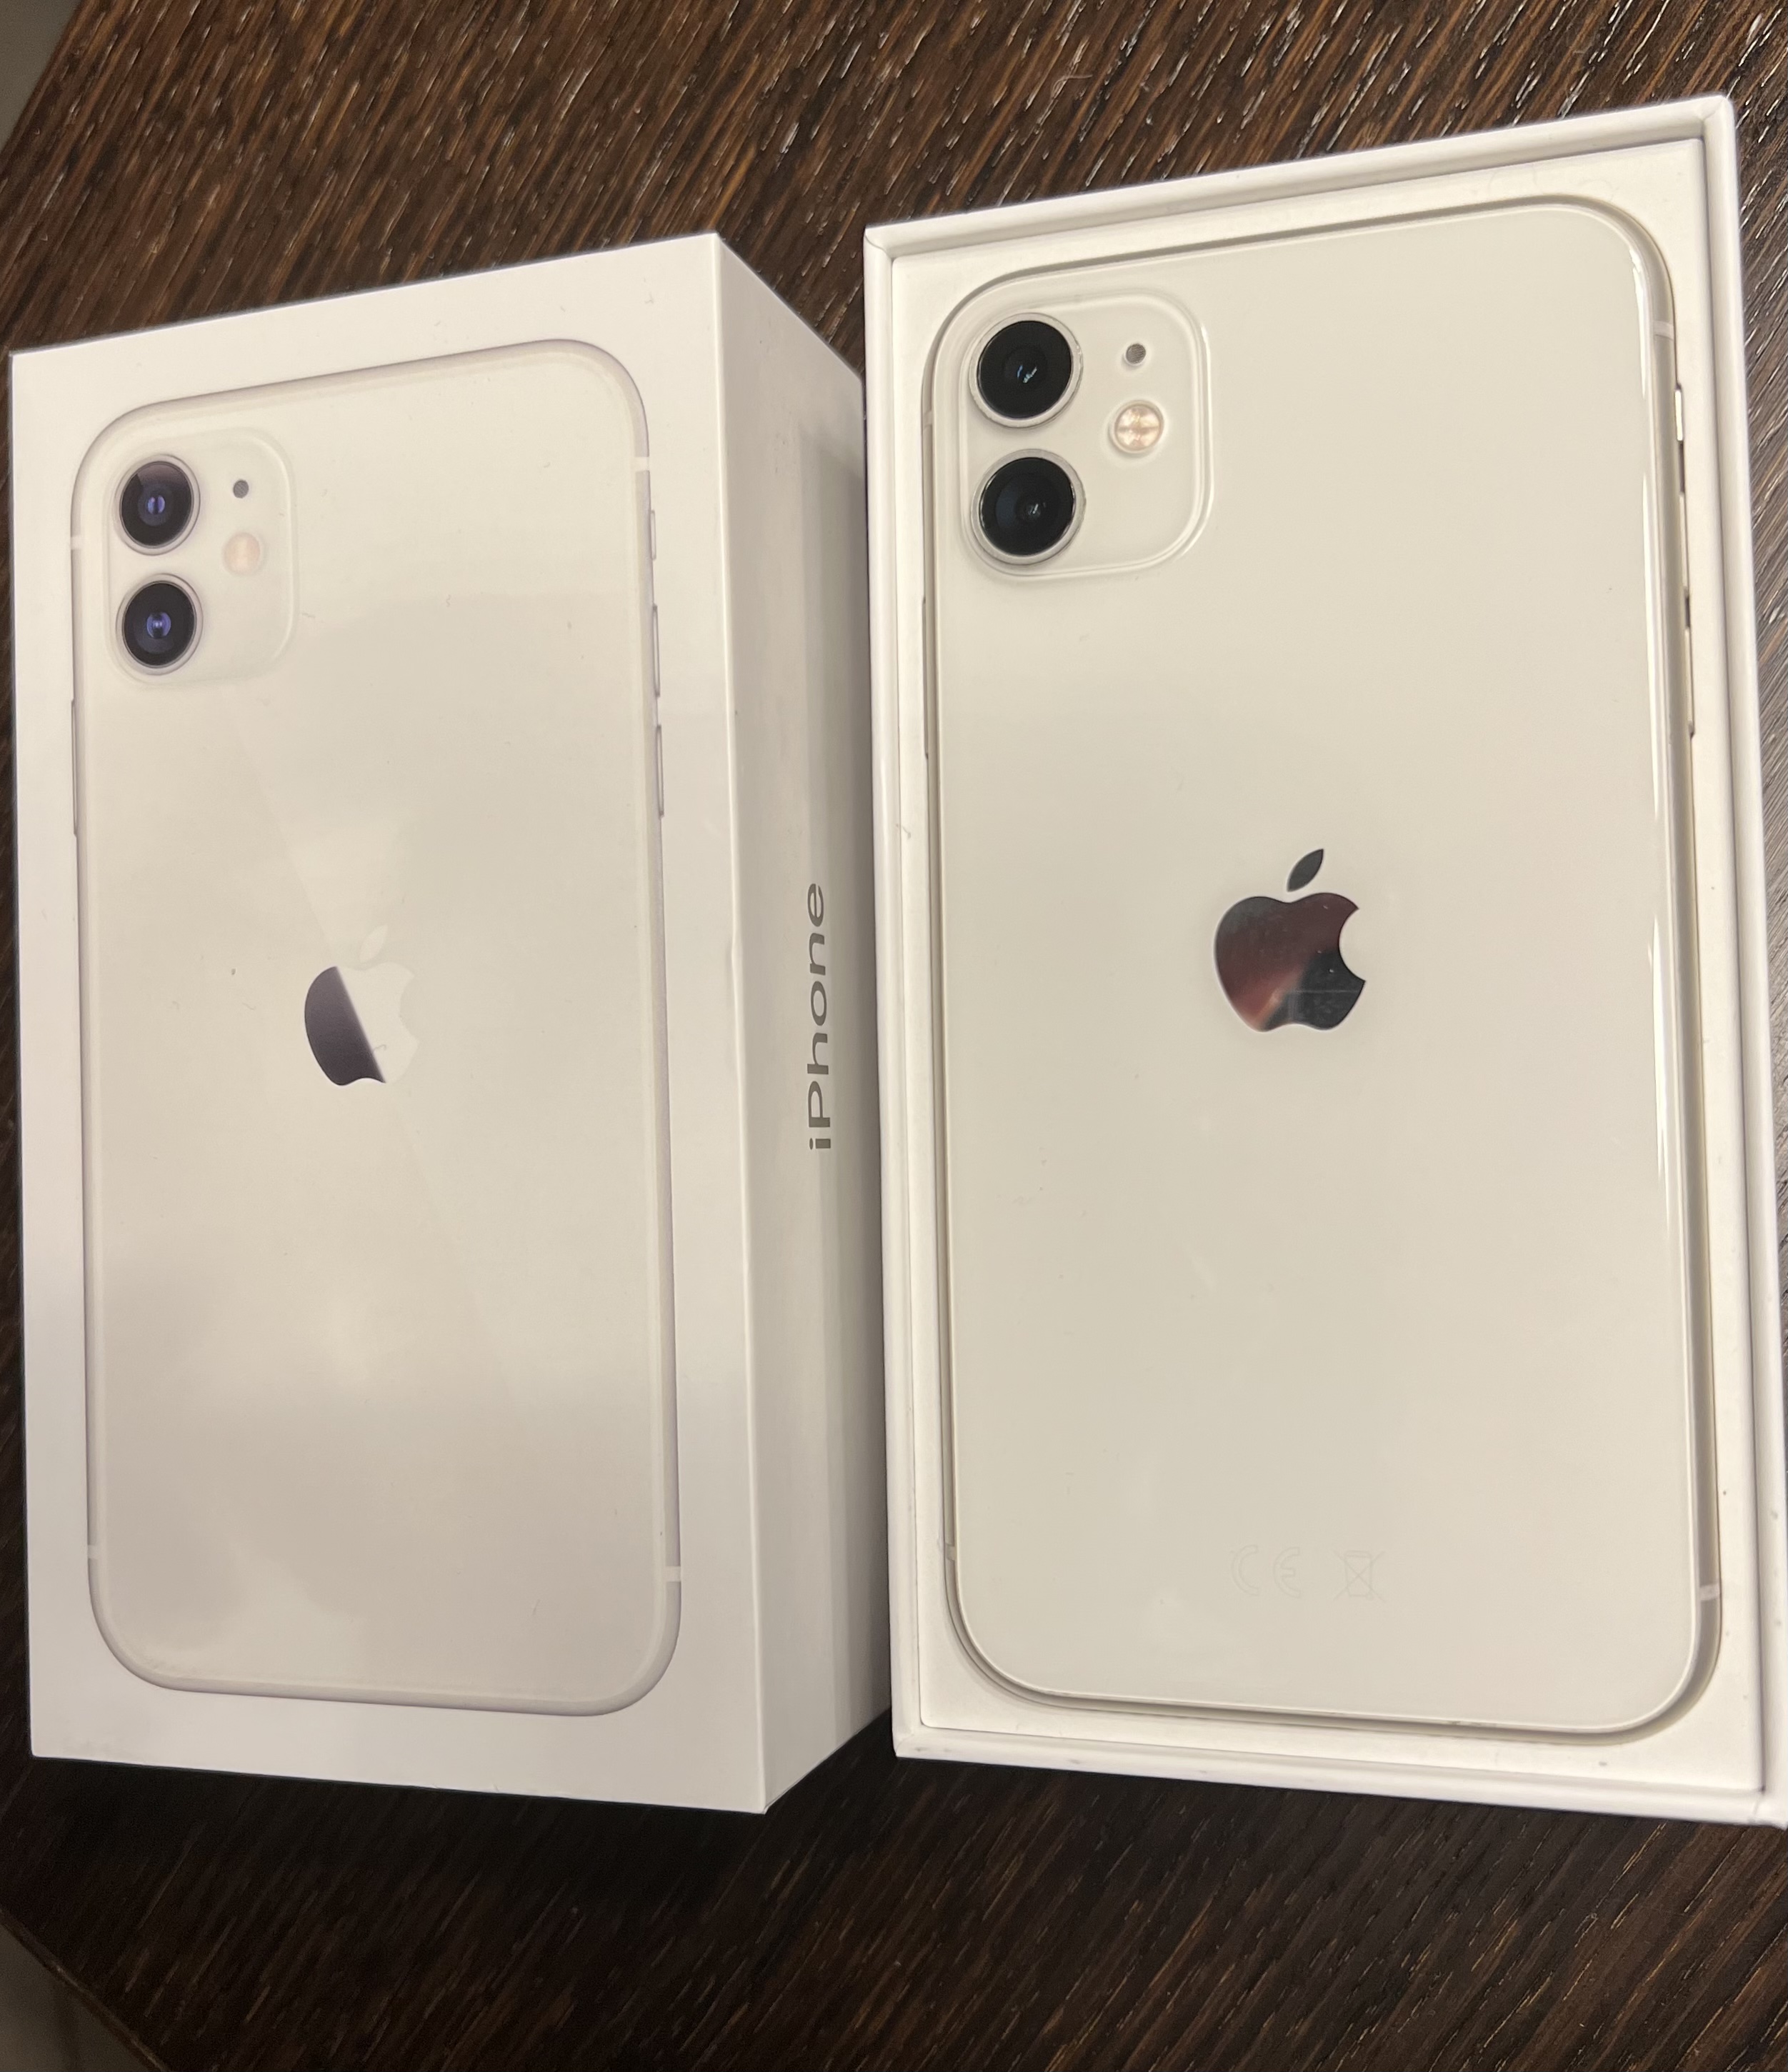 IPHONE 11 - 64g - White - iPhone - Insomnia.gr